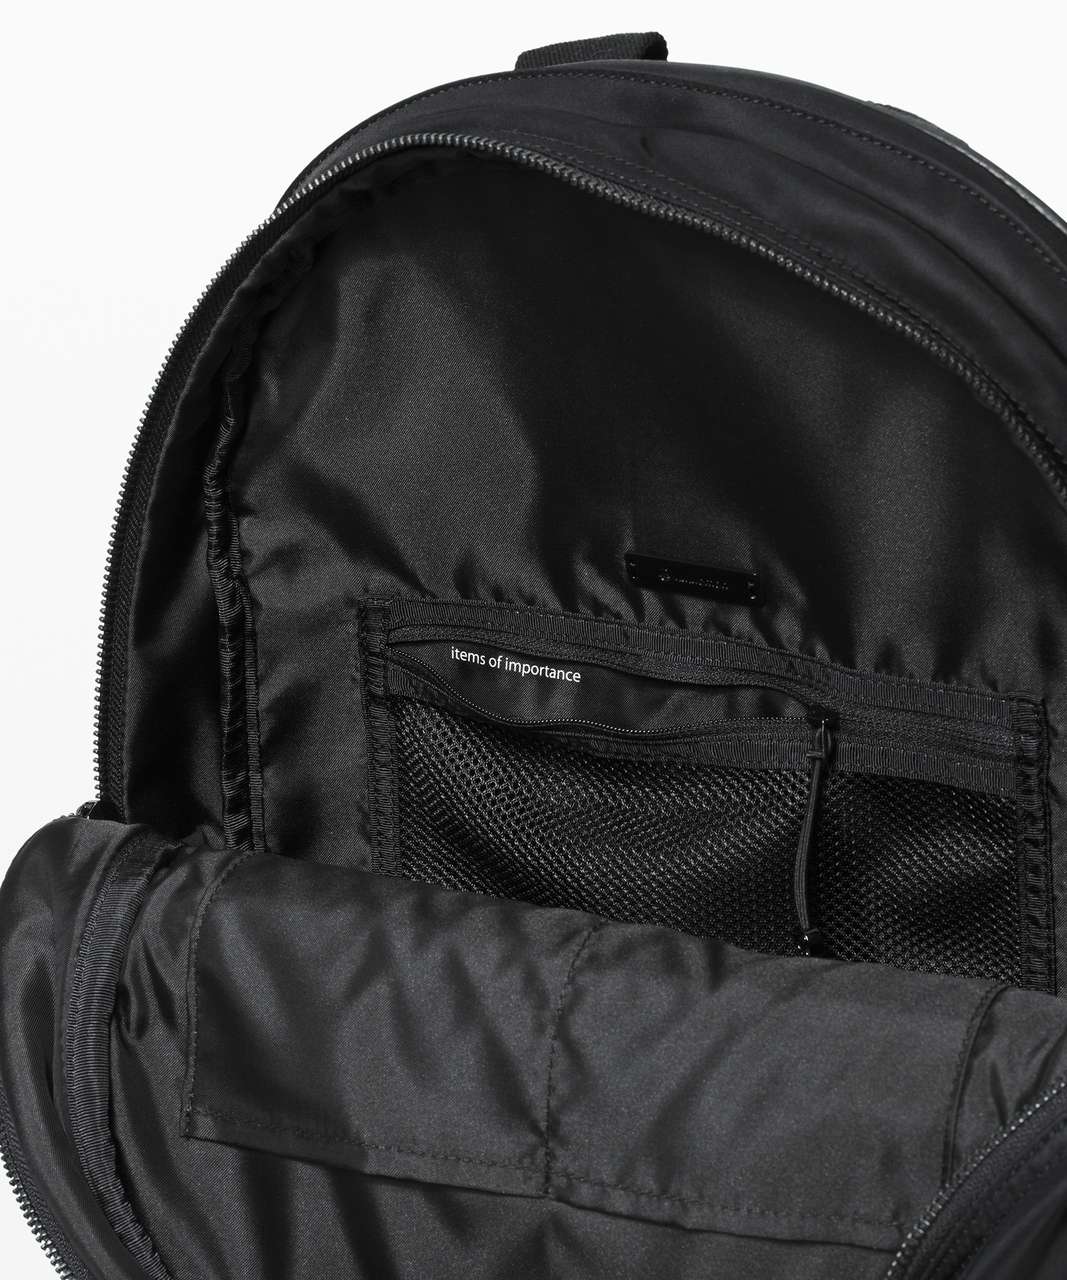 Lululemon Now and Always Backpack *18L - Black (First Release)